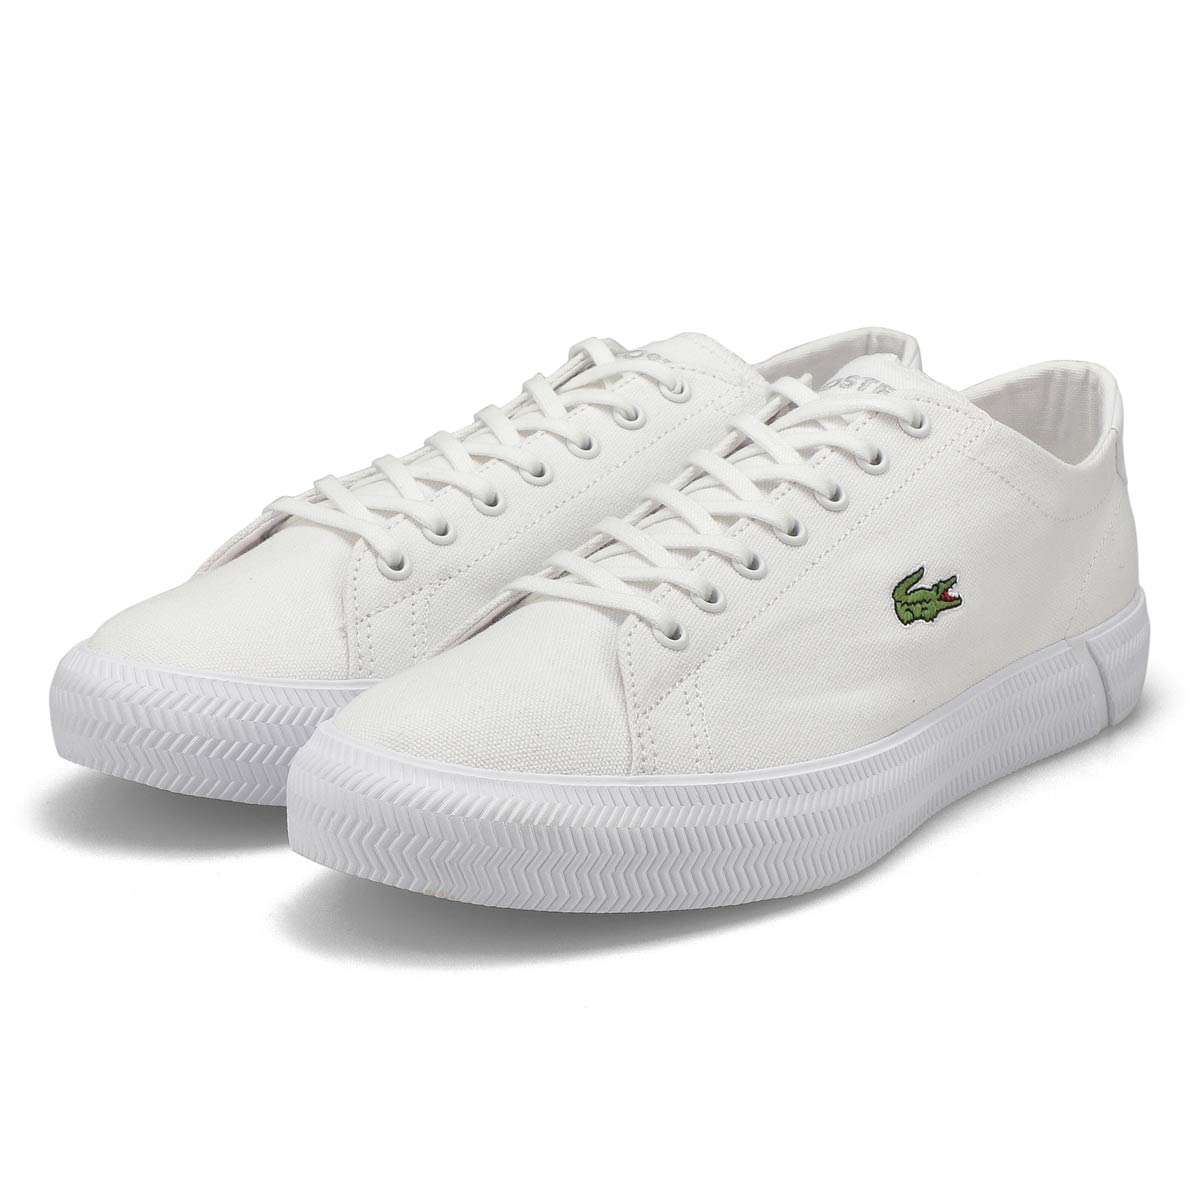 Lacoste Men's Gripshot BL Leather Sneaker - W | SoftMoc.com